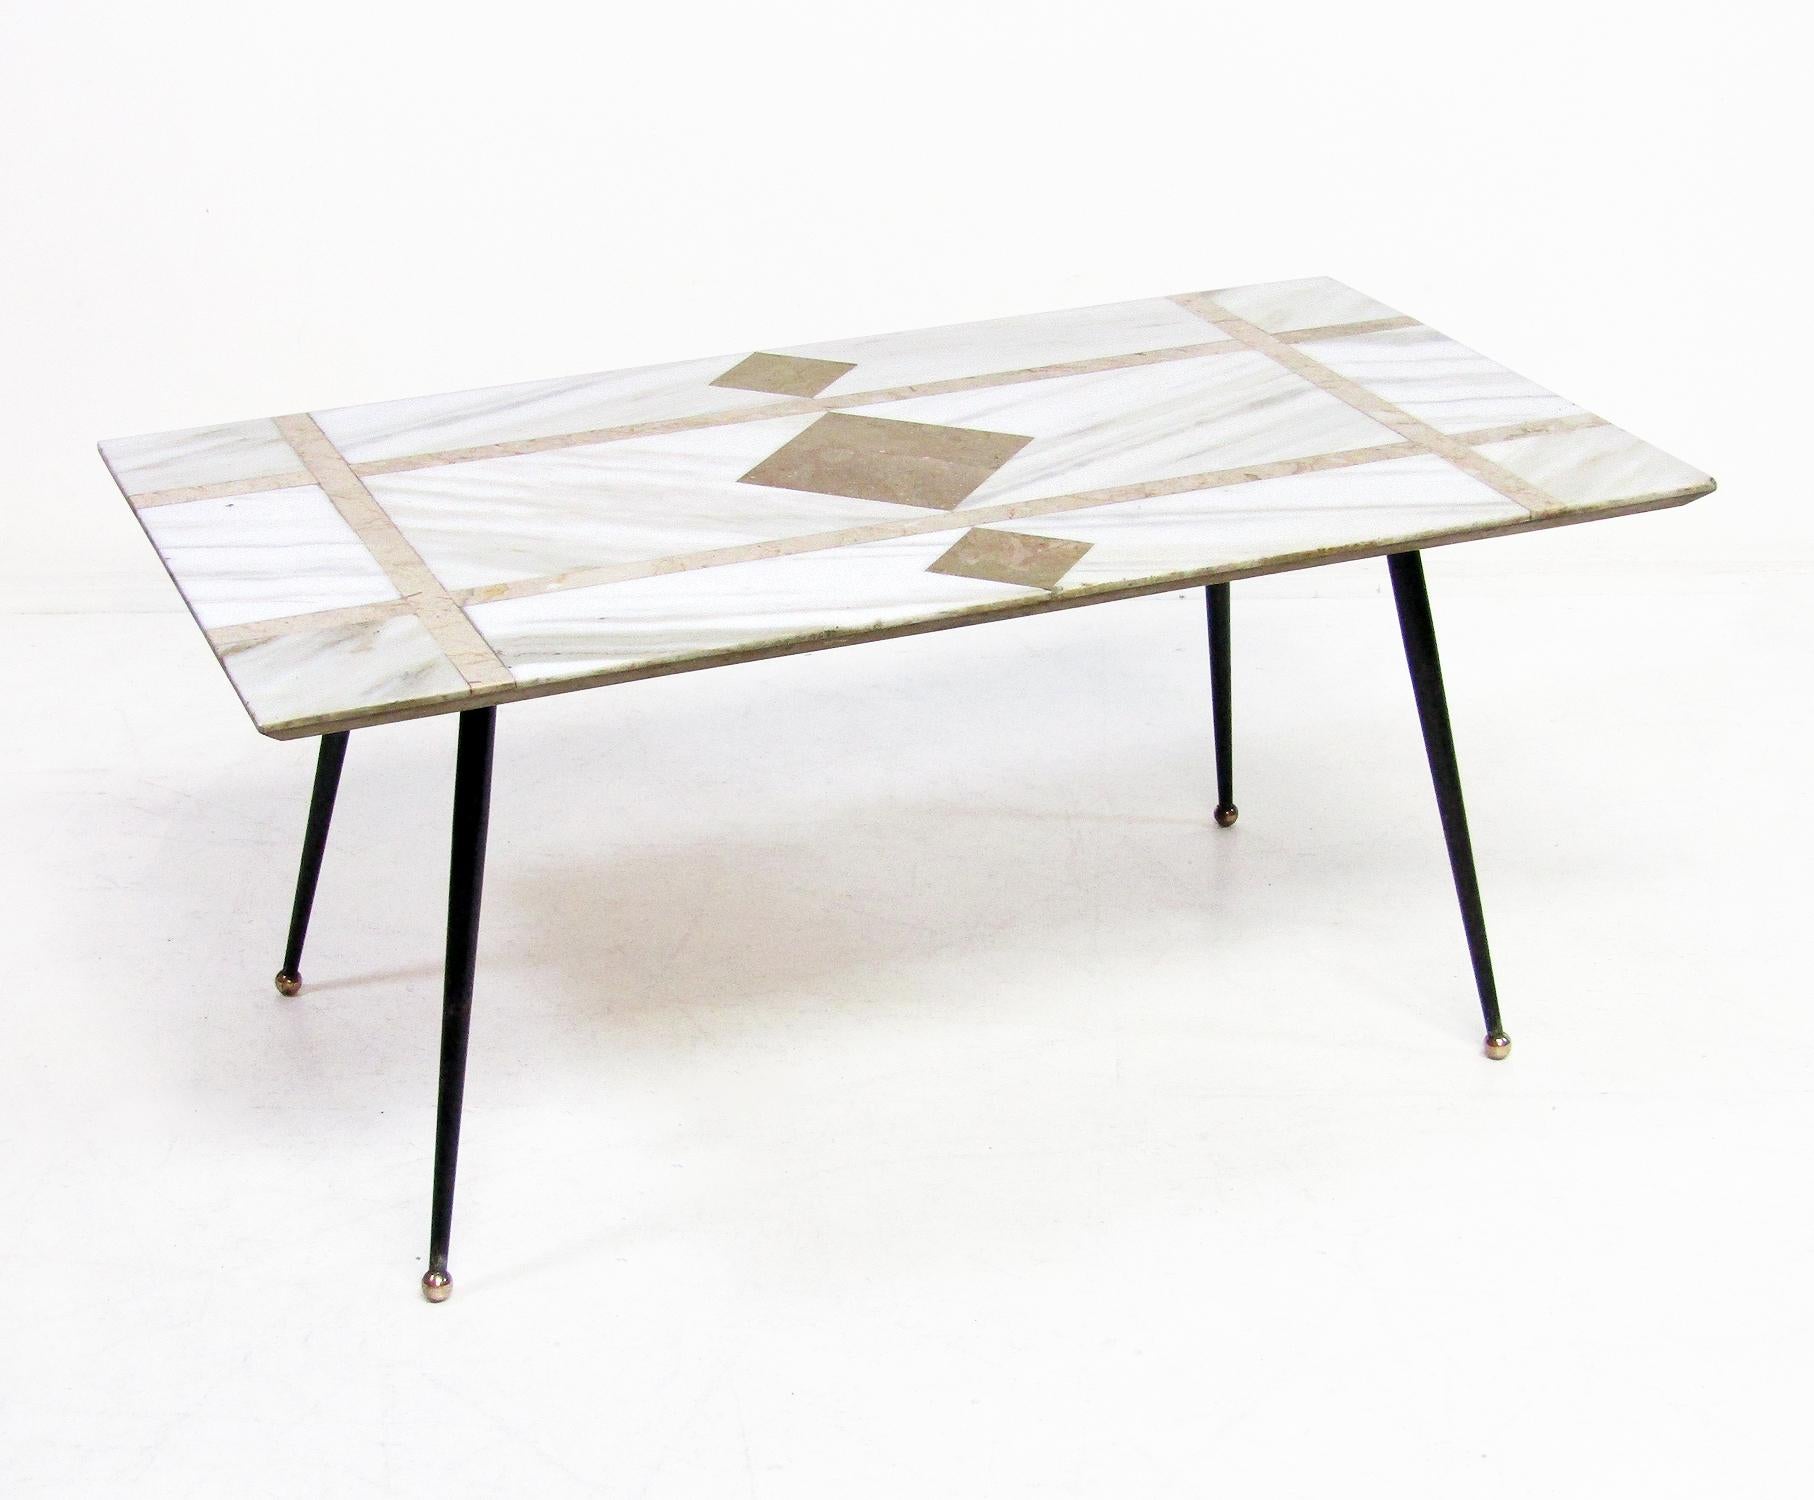 An original 1950s modernist Italian coffee table with unique marble surface.

The luxurious Carrera marble has pietra dura crossbanding with striking diamond central motif. It rests on atomic metal legs with brass orb feet.

It has remnants of the